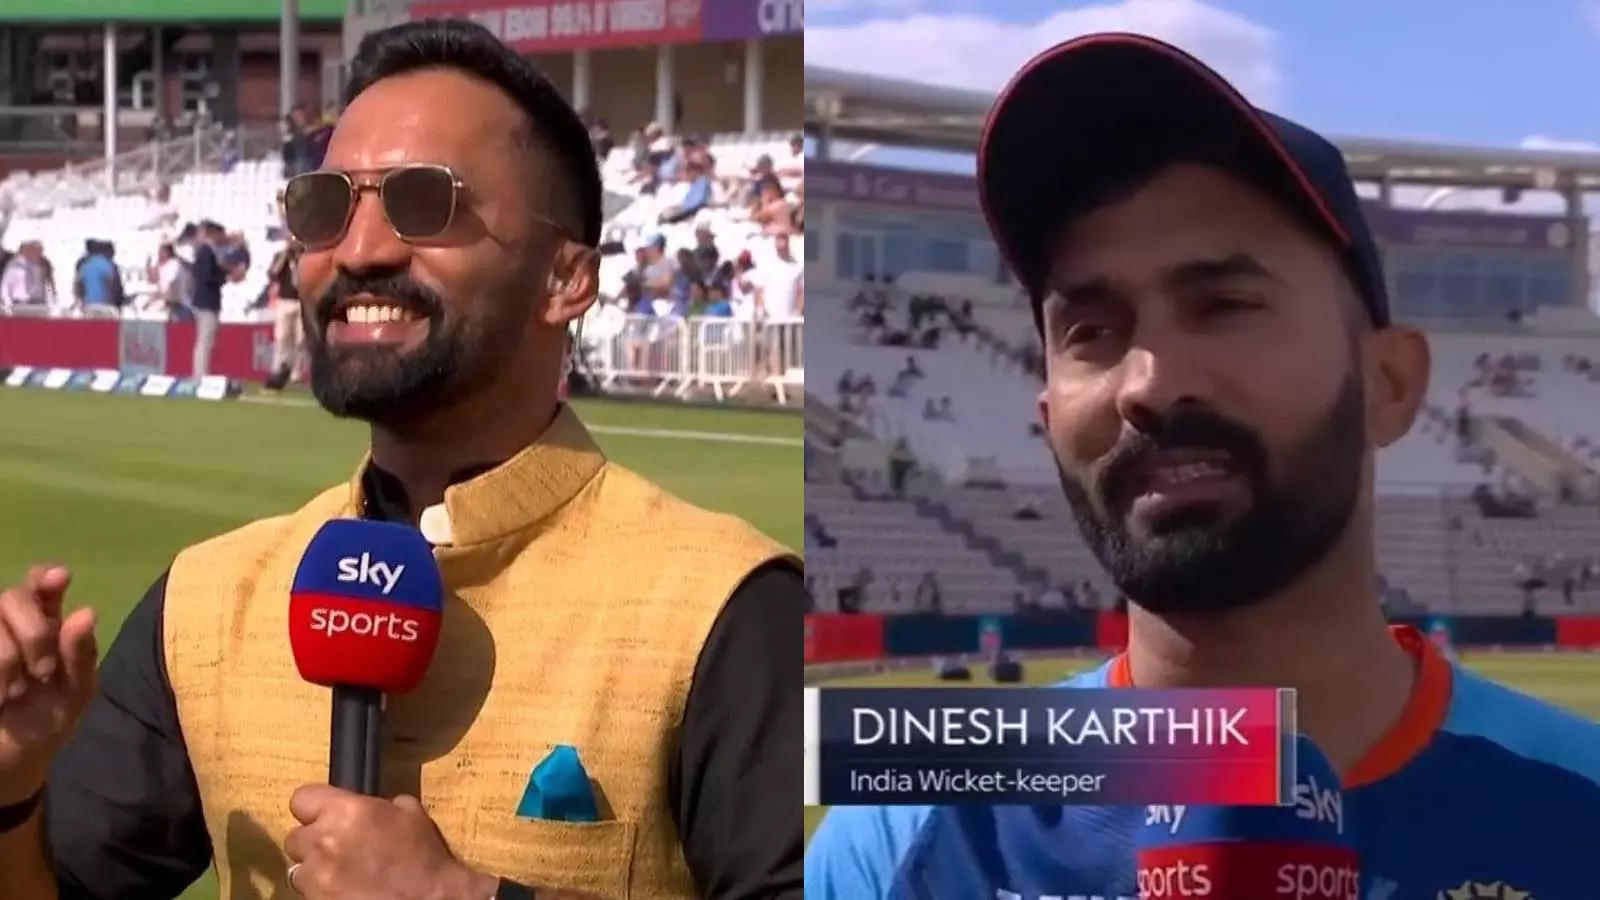 Dinesh Karthik had featured for a broadcaster as commentator last year